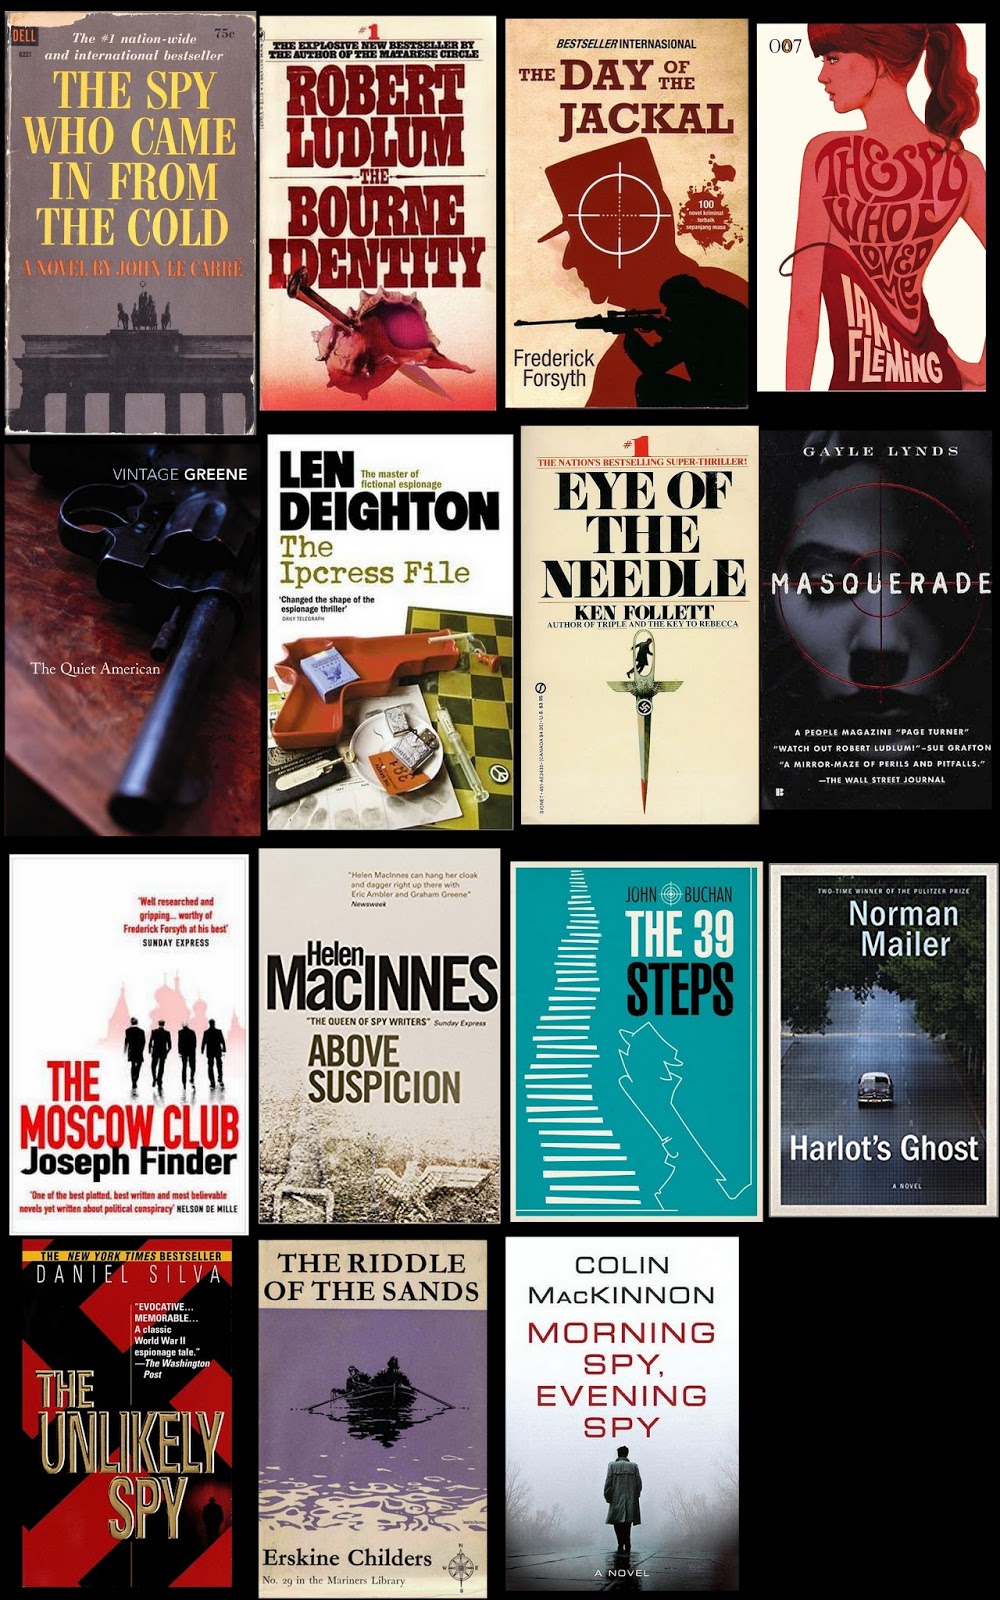 The Book Tripper Top 15 Espionage Novels by Publisher's Weekly (2006)